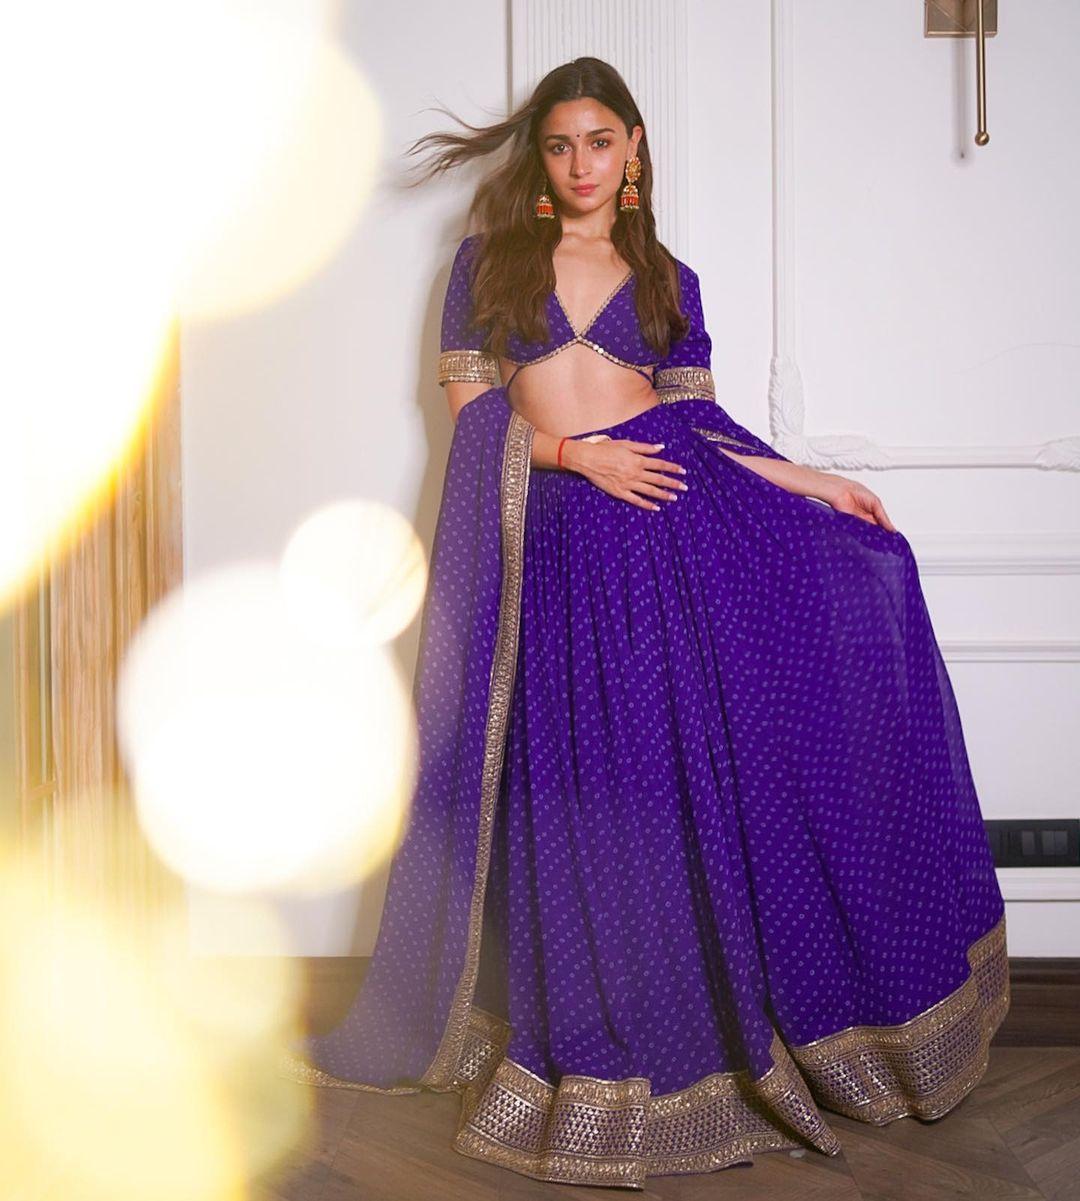 Alia Bhatt Keeps Her Baby Bump Away From The Camera! Her Fashion Game  Reminds Us Of 'Ghar More Pardesiya'